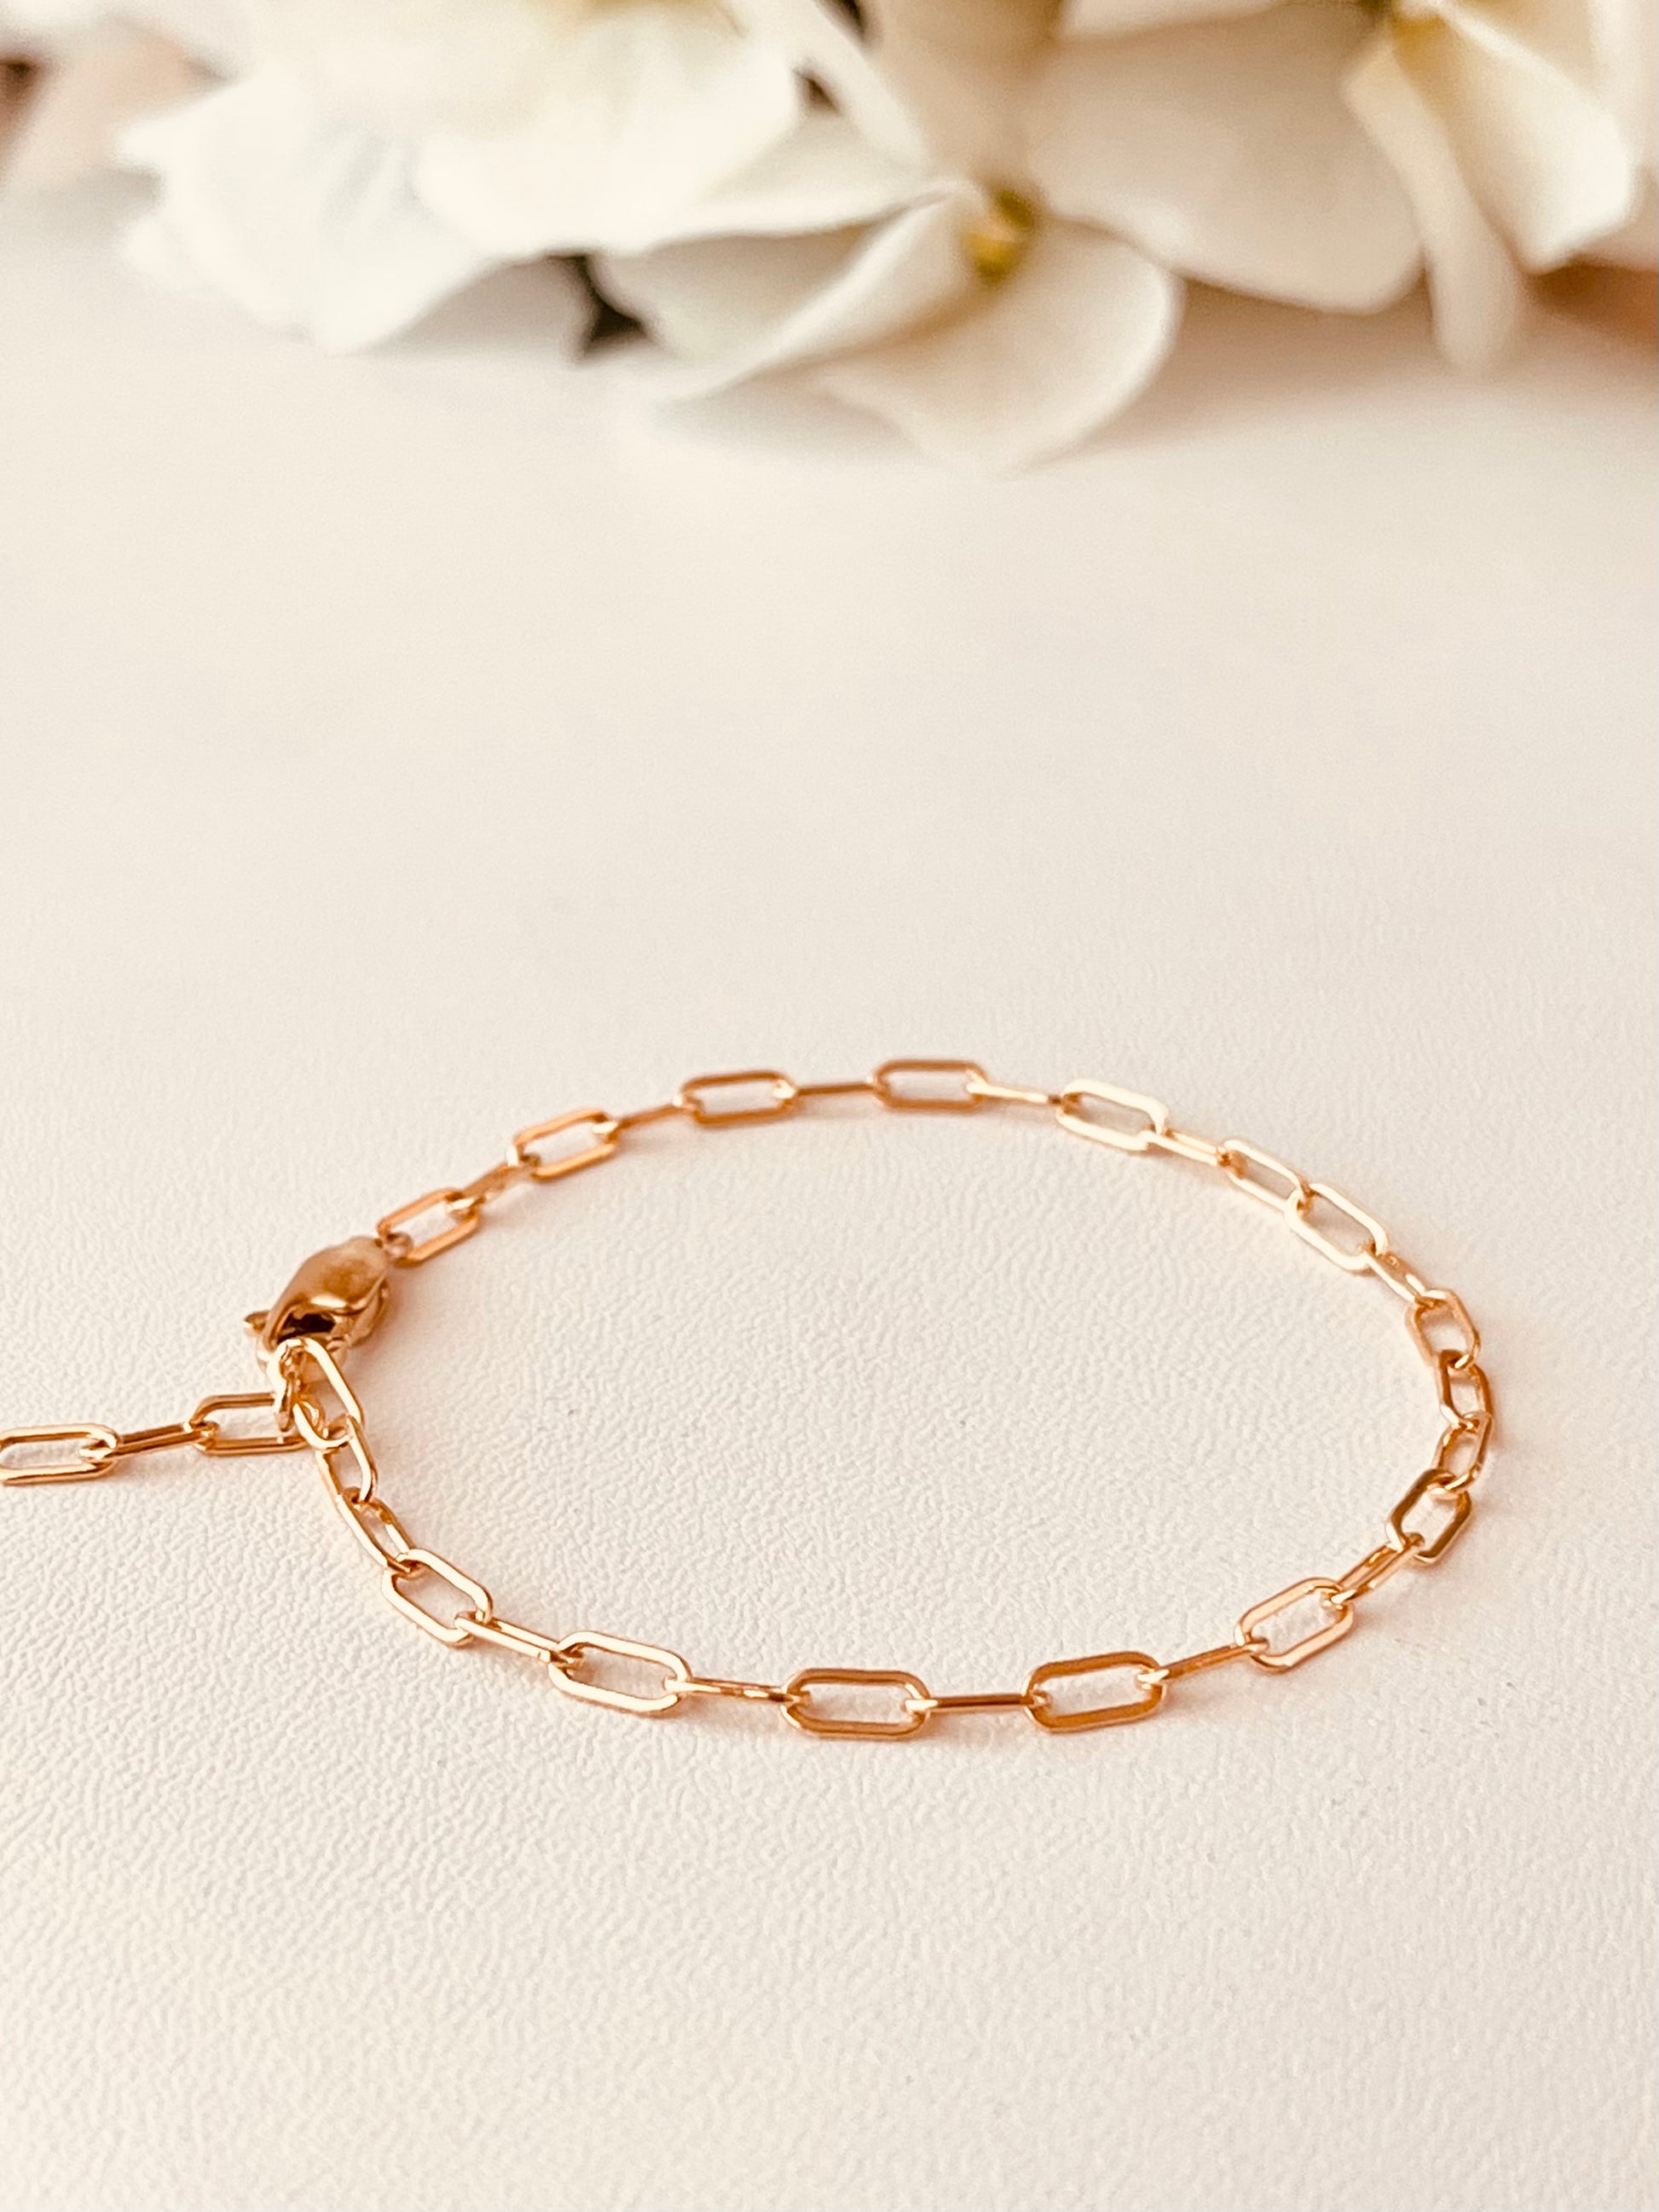 Paperclip Chain Bracelet, Link Bracelet, Everyday Bracelet, Bridesmaid Jewelry, Timeless Bracelet, Mothers Gift, Gift For Her, THICK LINK CHAIN,  Mothers Gift, Coco Wagner Design, Gift For Her, Birthday Gift, Christmas Gift Ideas,  Everyday Jewelry, Simple and Dainty,  Holiday gift 